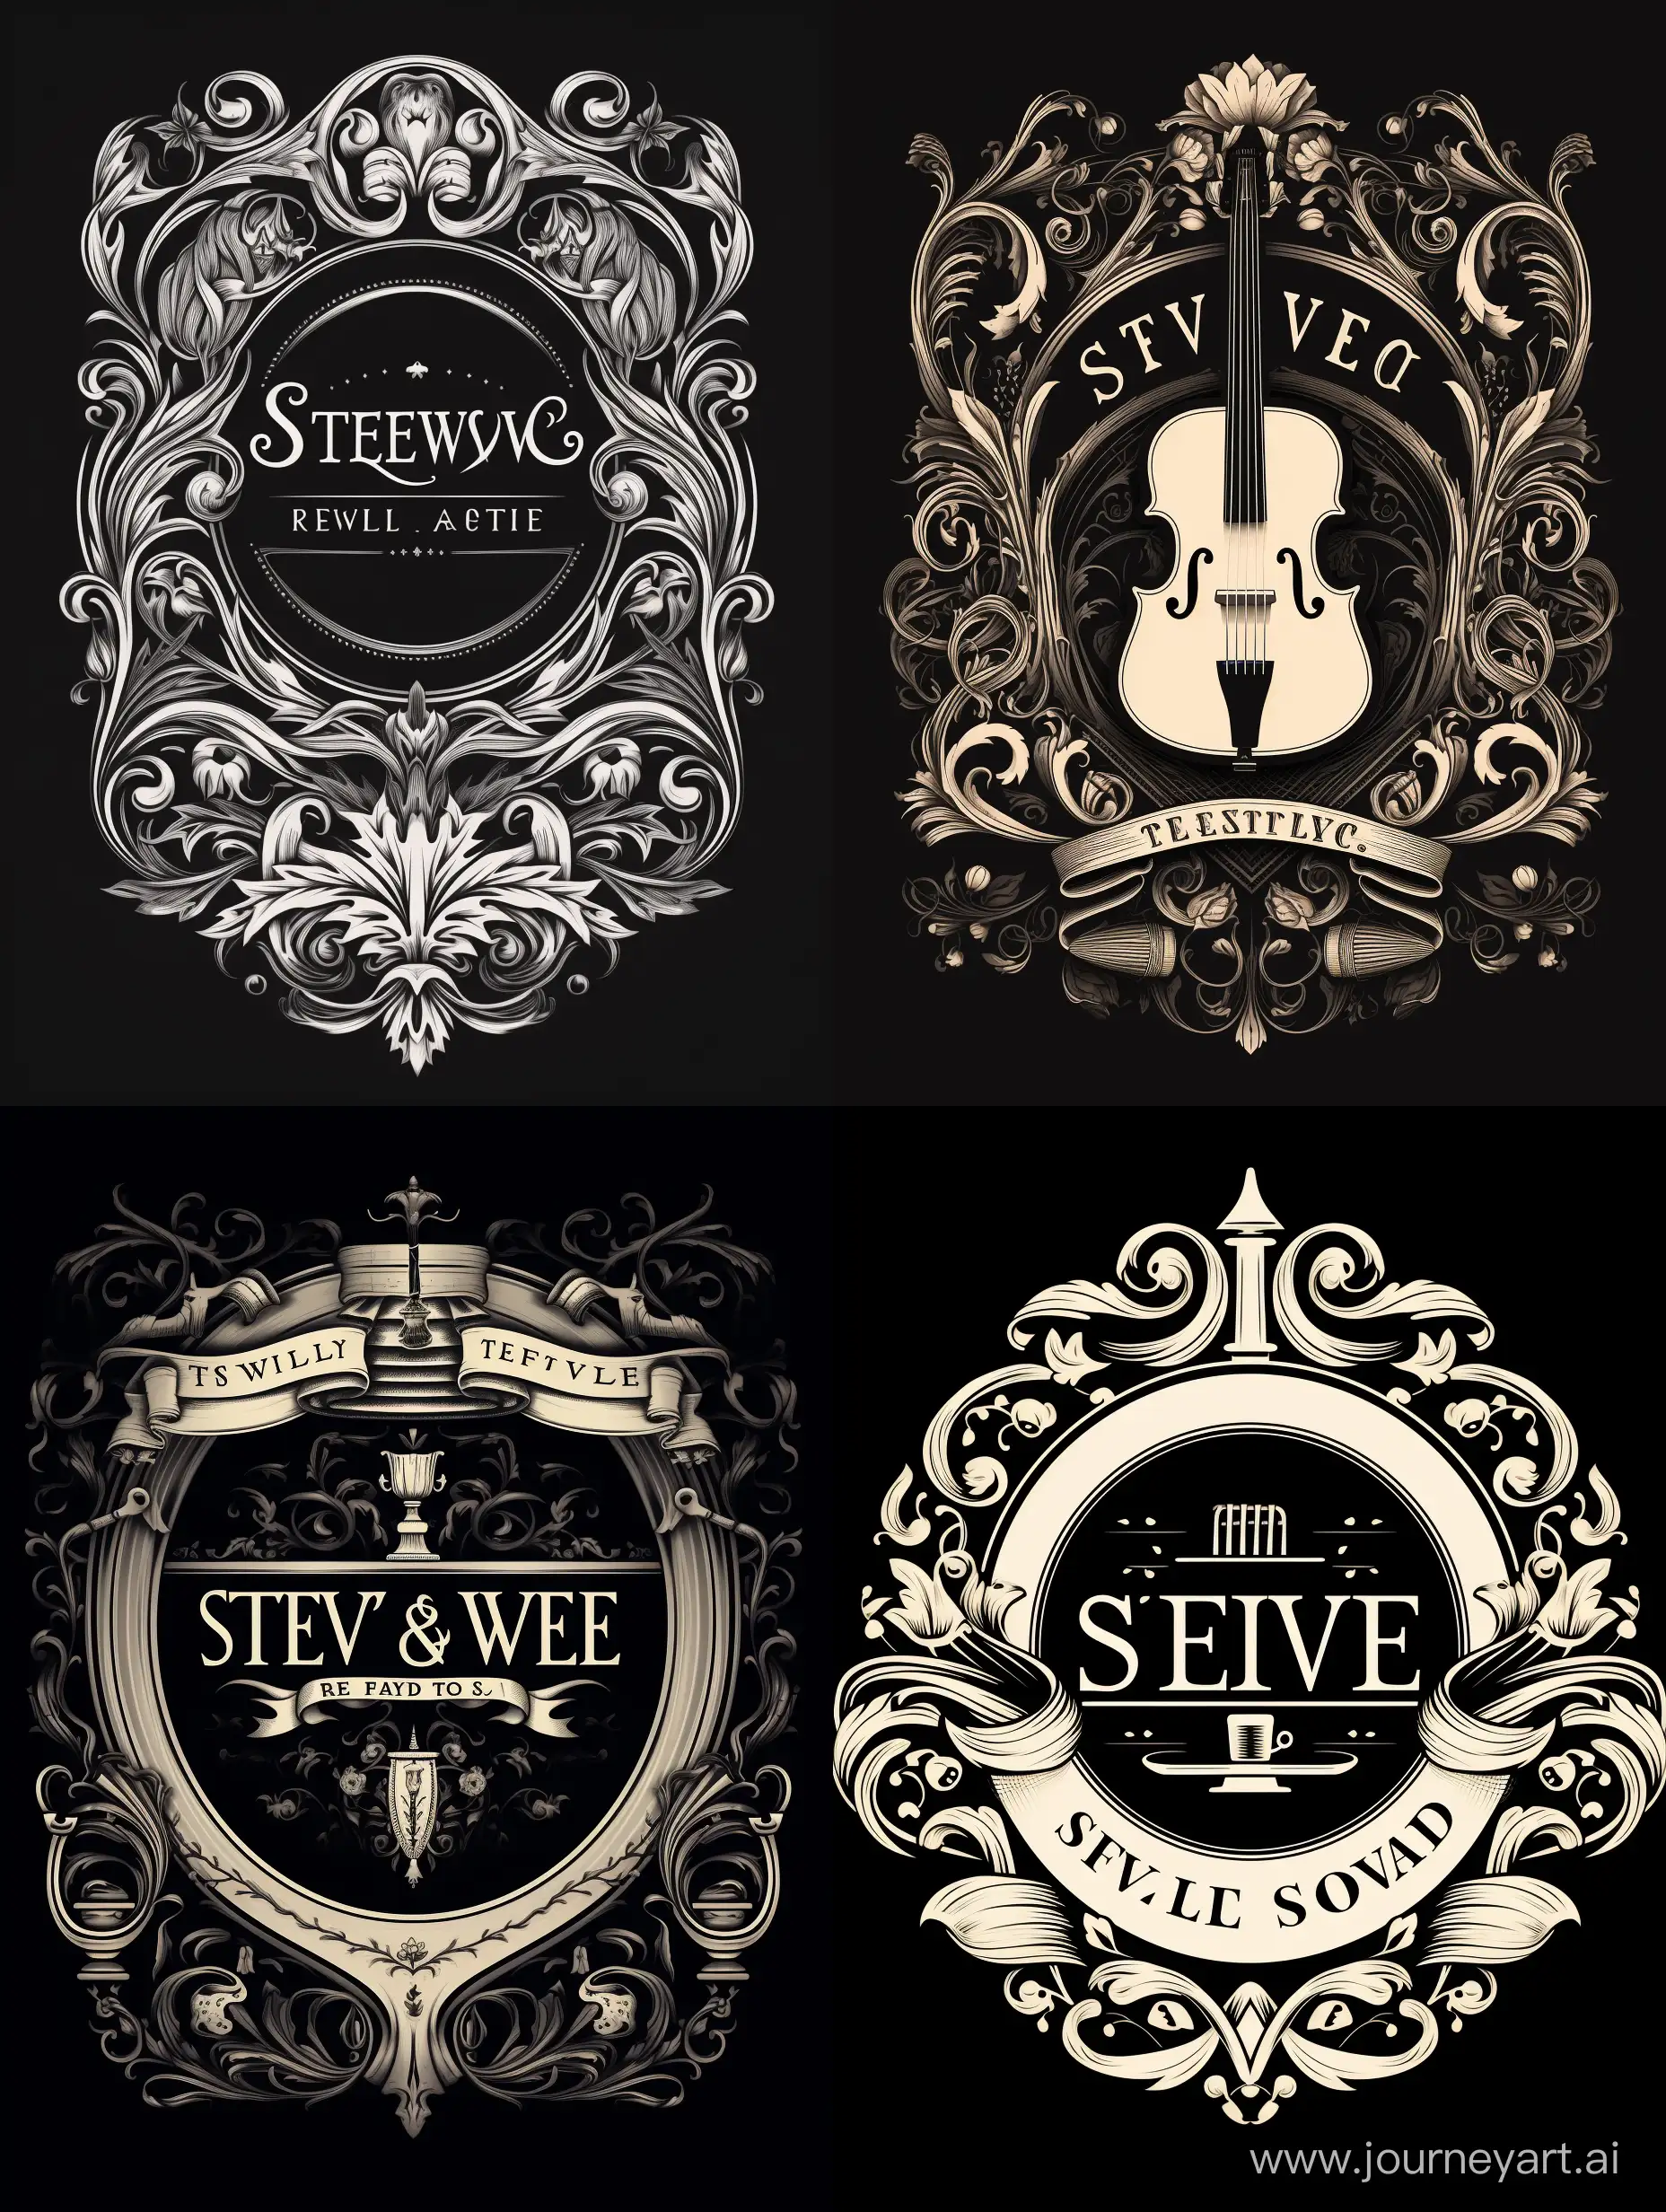 « STEEVE & FOLK » logo, carpet cleaning service company, European style, black and white